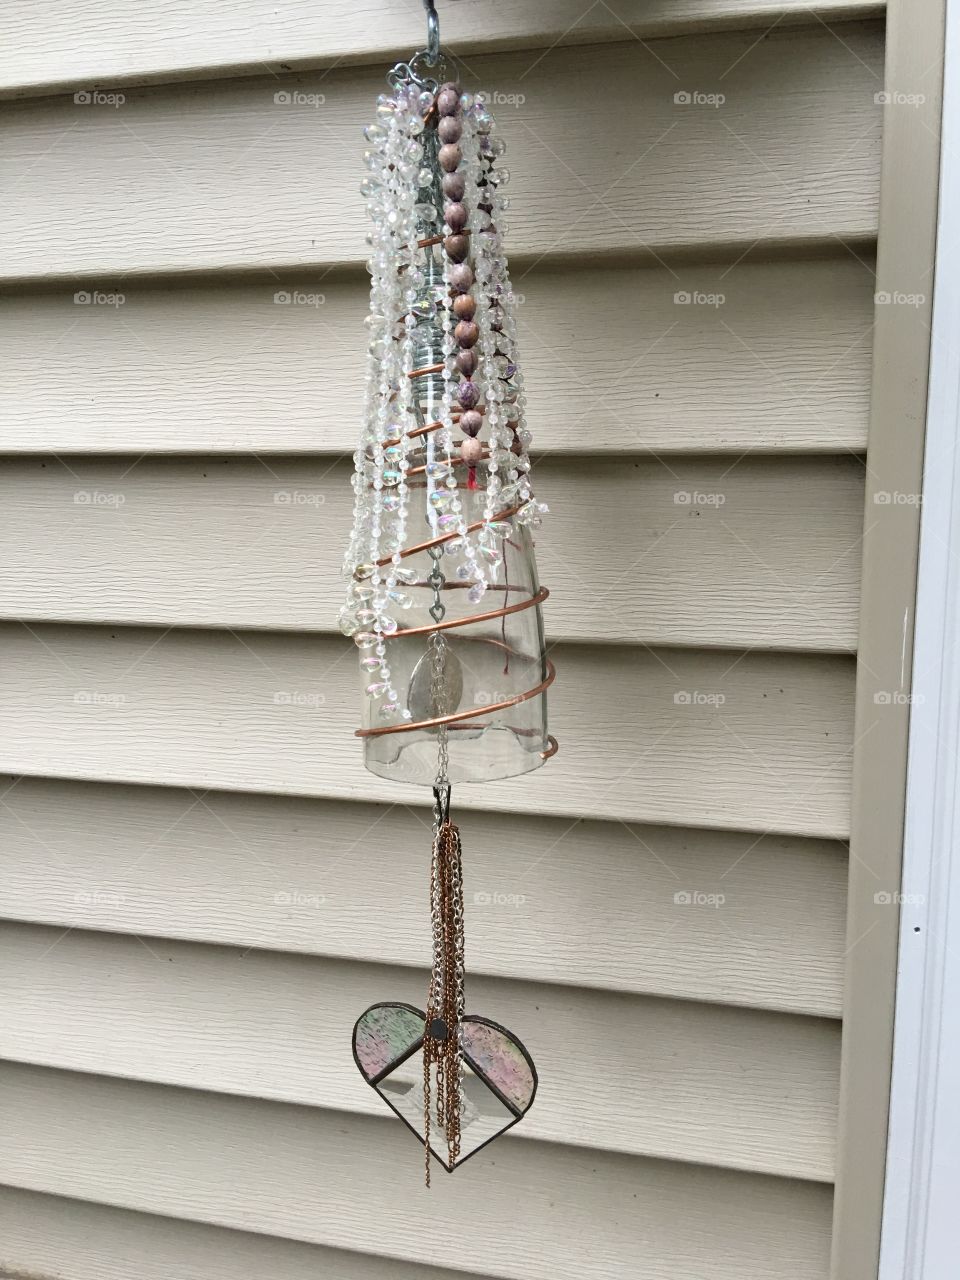 Using recycled items to create a new wind chime 